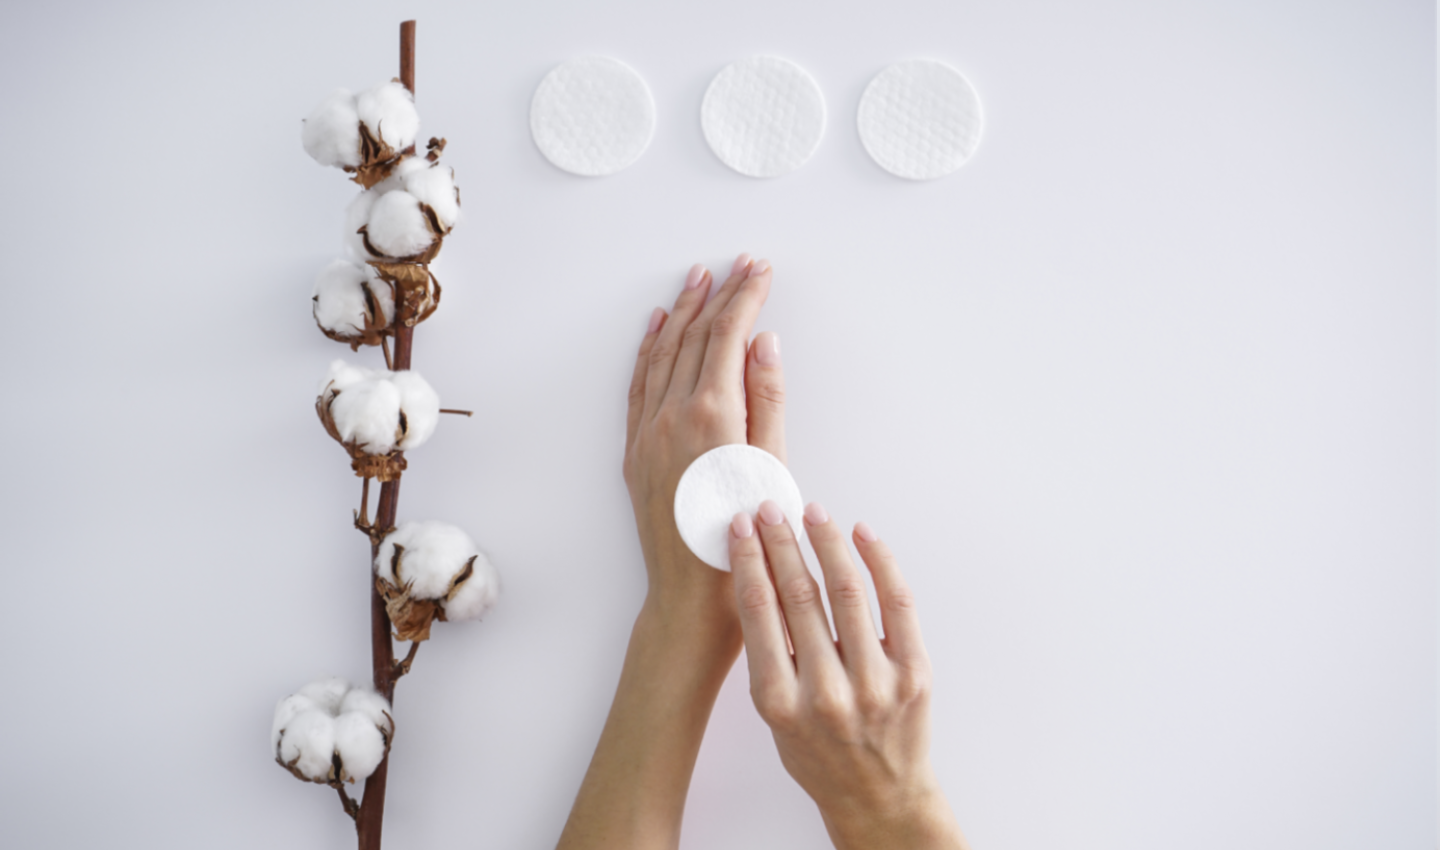 A cotton branch and pieces of cotton with hands holding them, representing sustainable makeup removers.